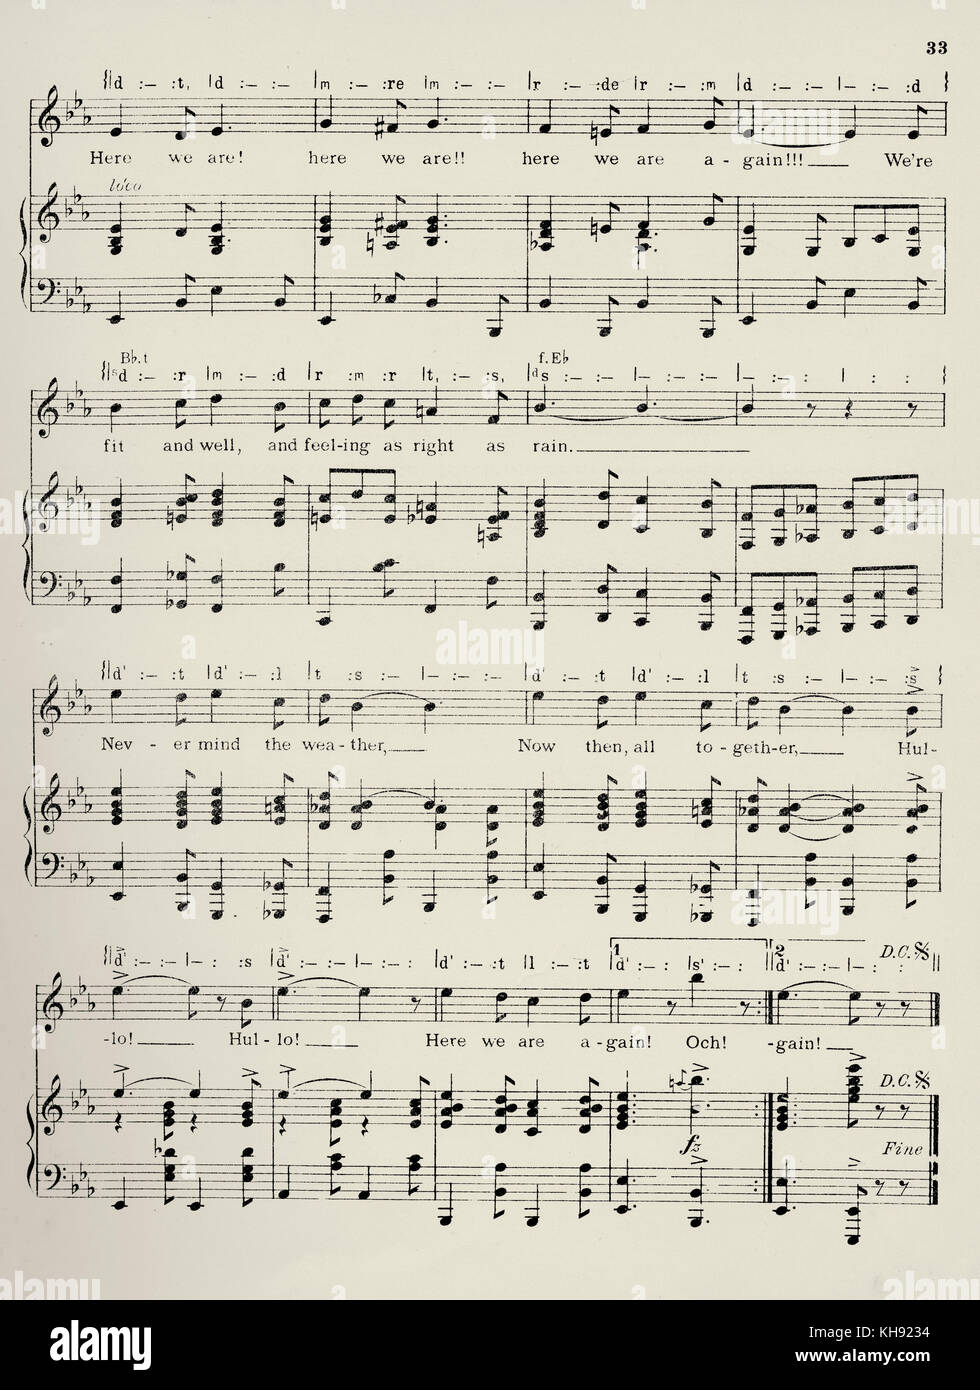 'Here We Are! Here We Are!! Here We Are Again!!!' - song written and composed by Charles Knight and Kenneth Lyle. 1914. Popular during World War One. Page 2 of 3. Stock Photo